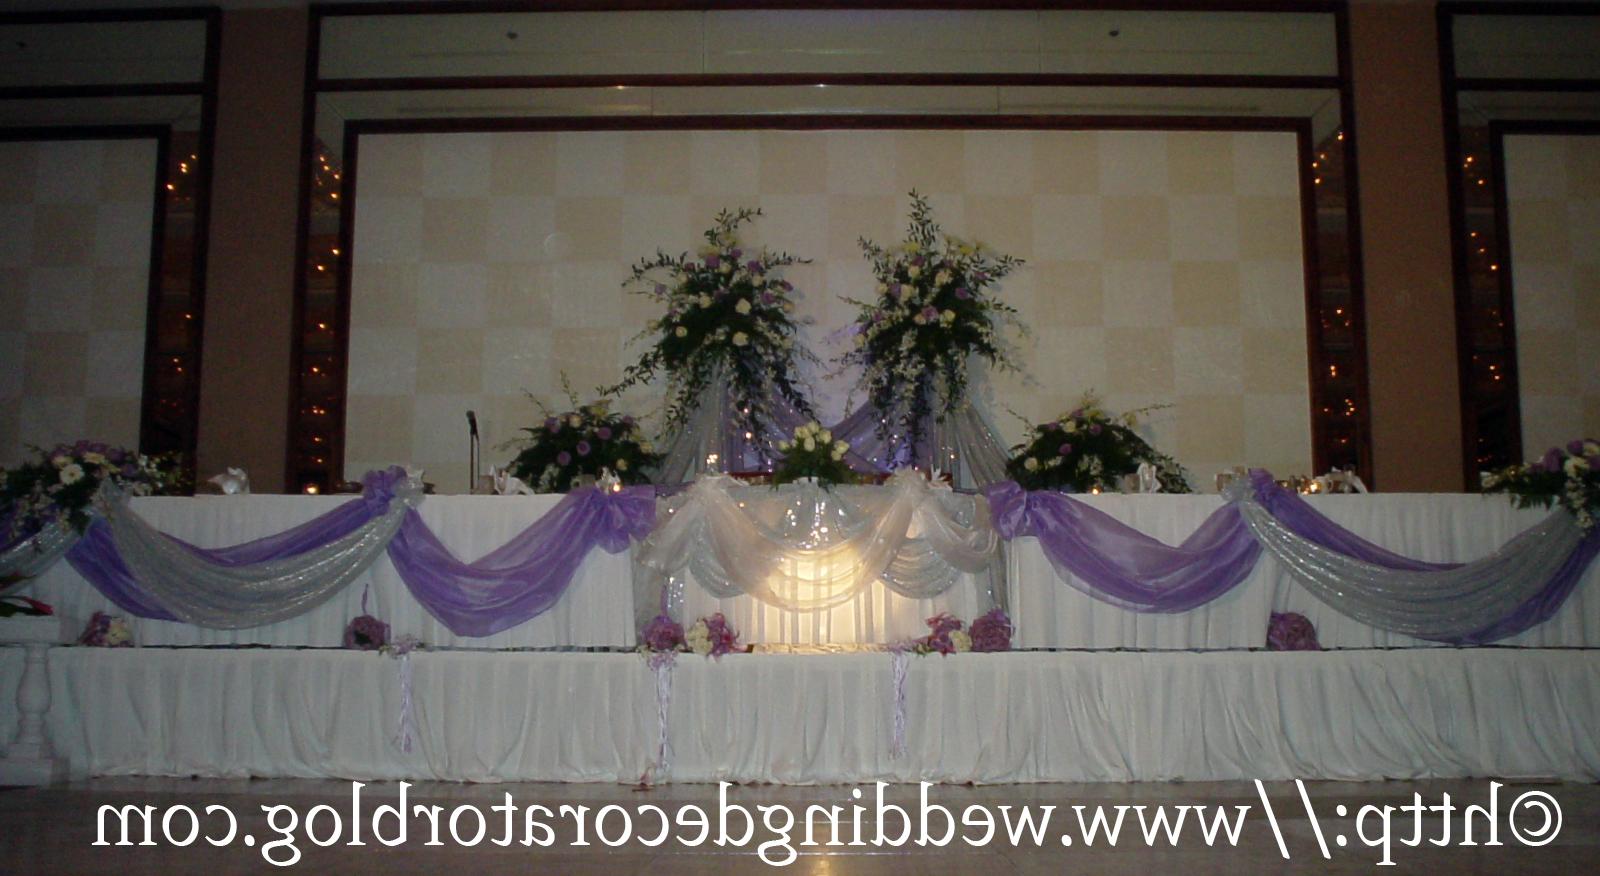 Decorating a long head table